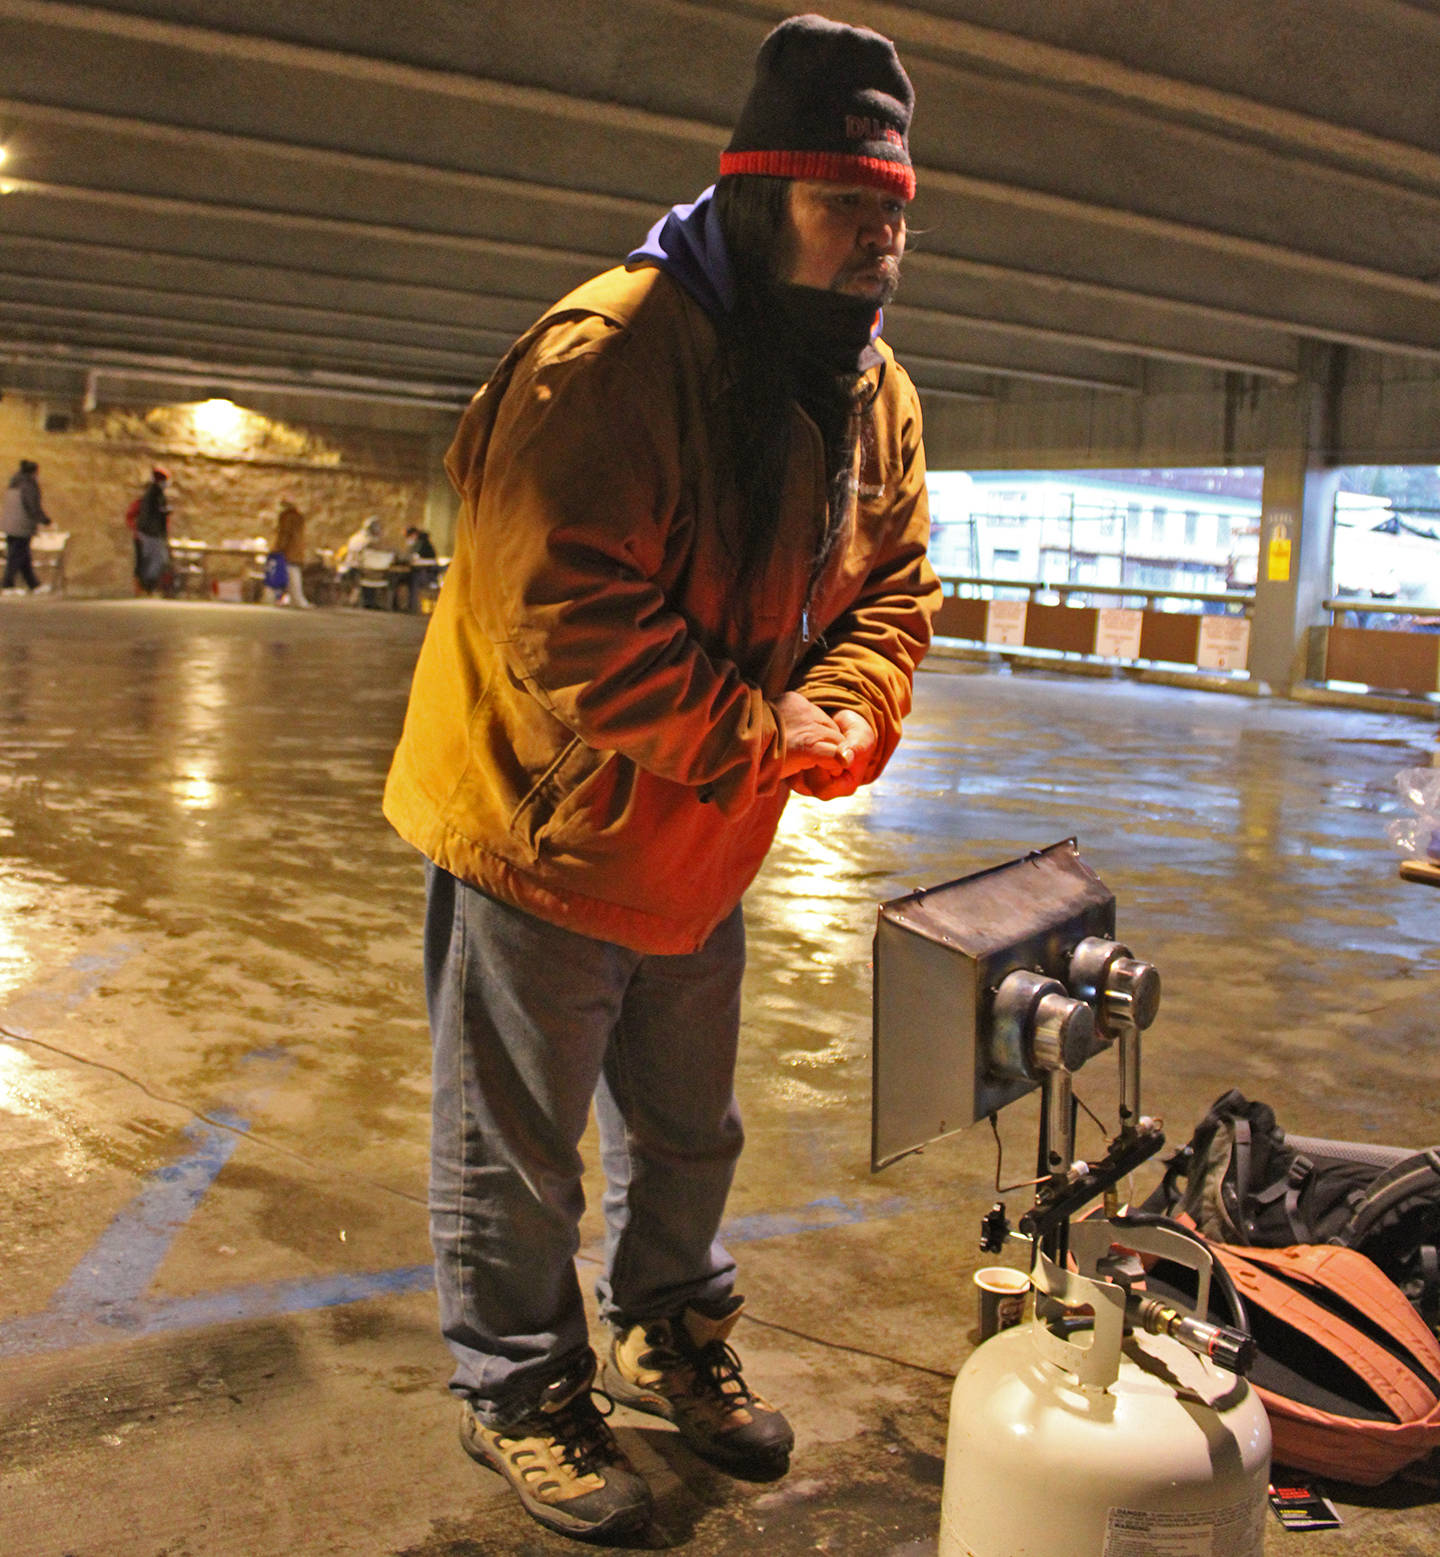 Charles Fawcett Jr. warms up near a heater in the Marine Parking Garage on Saturday, Nov. 28. The parking garage was the site of Juneau Street Warming event meant to provide on-the-spot assistance to people experiencing homelessness. (Ben Hohenstatt / Juneau Empire)